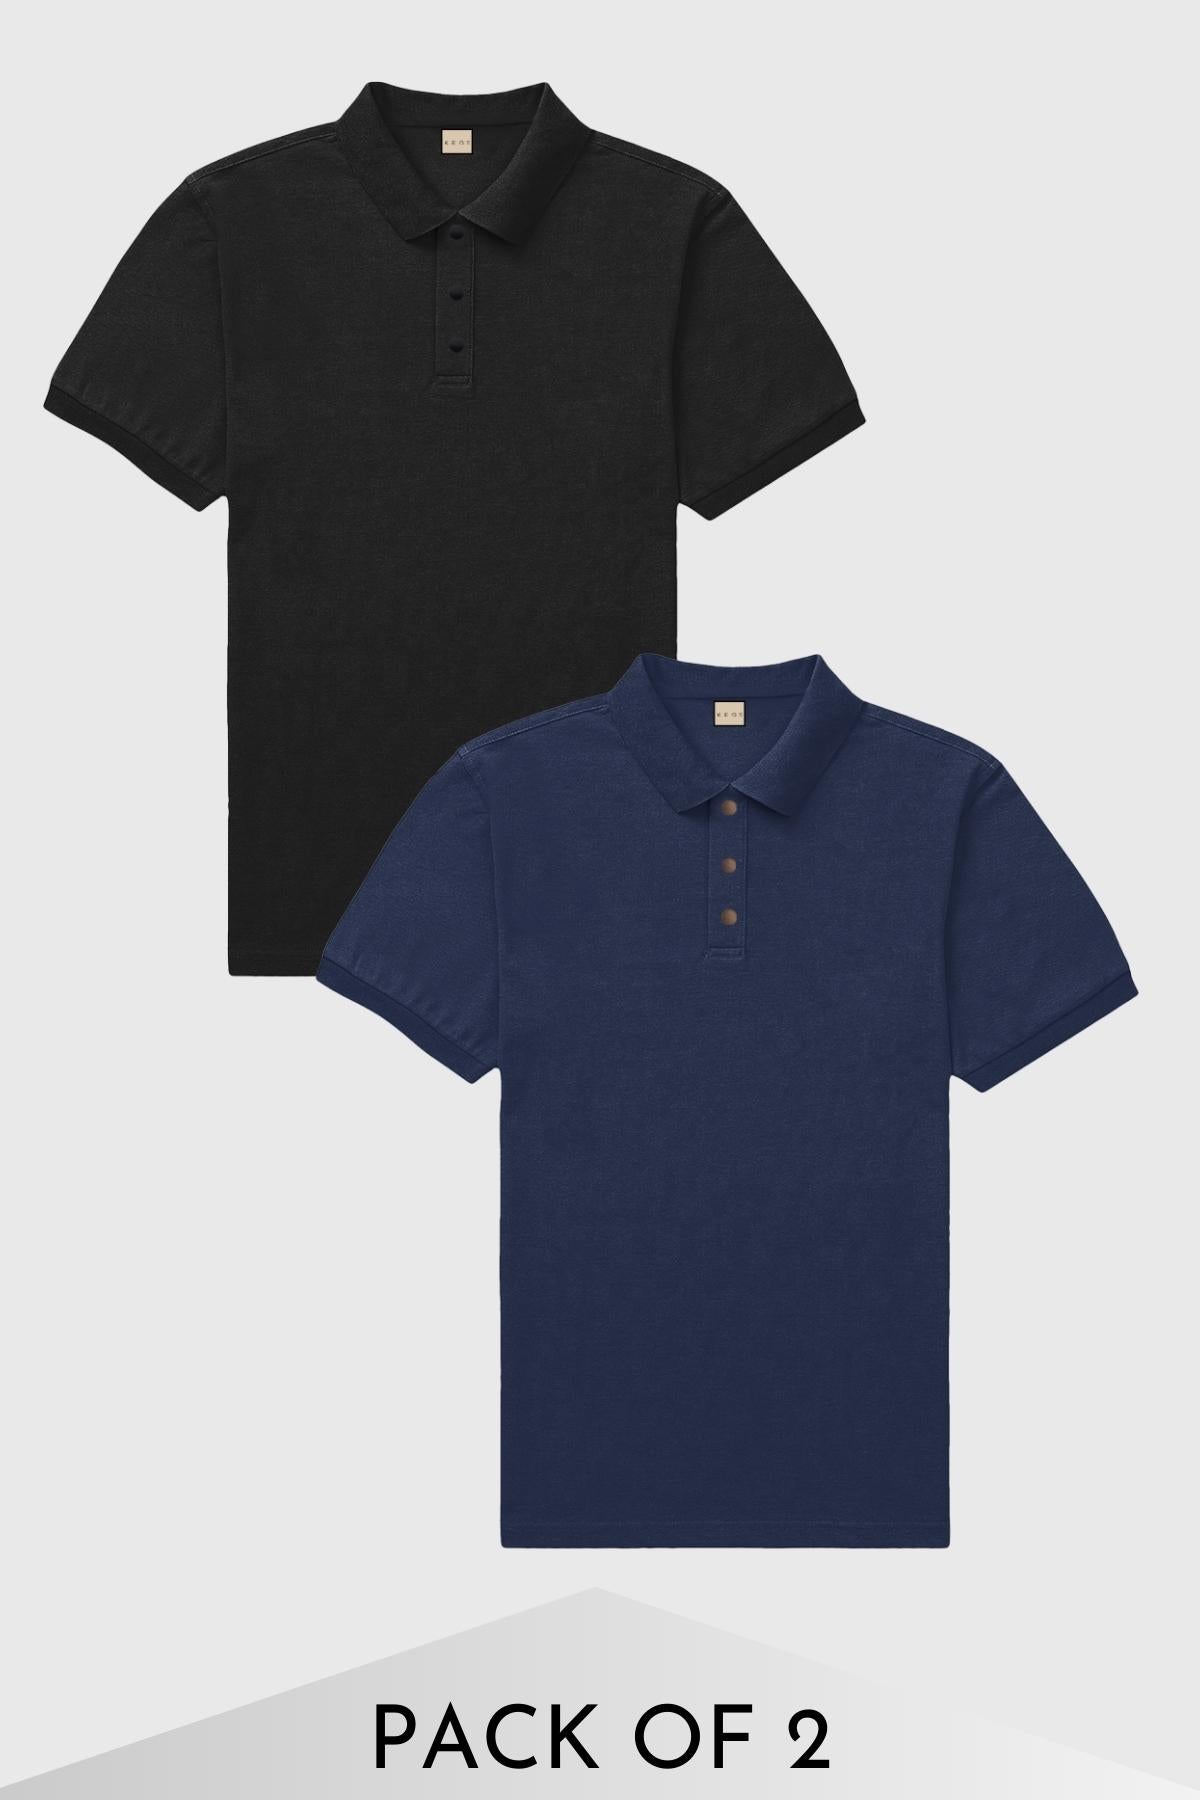 Keos Classic Polos - Panther & Marine - Pack of 2 - keos.life